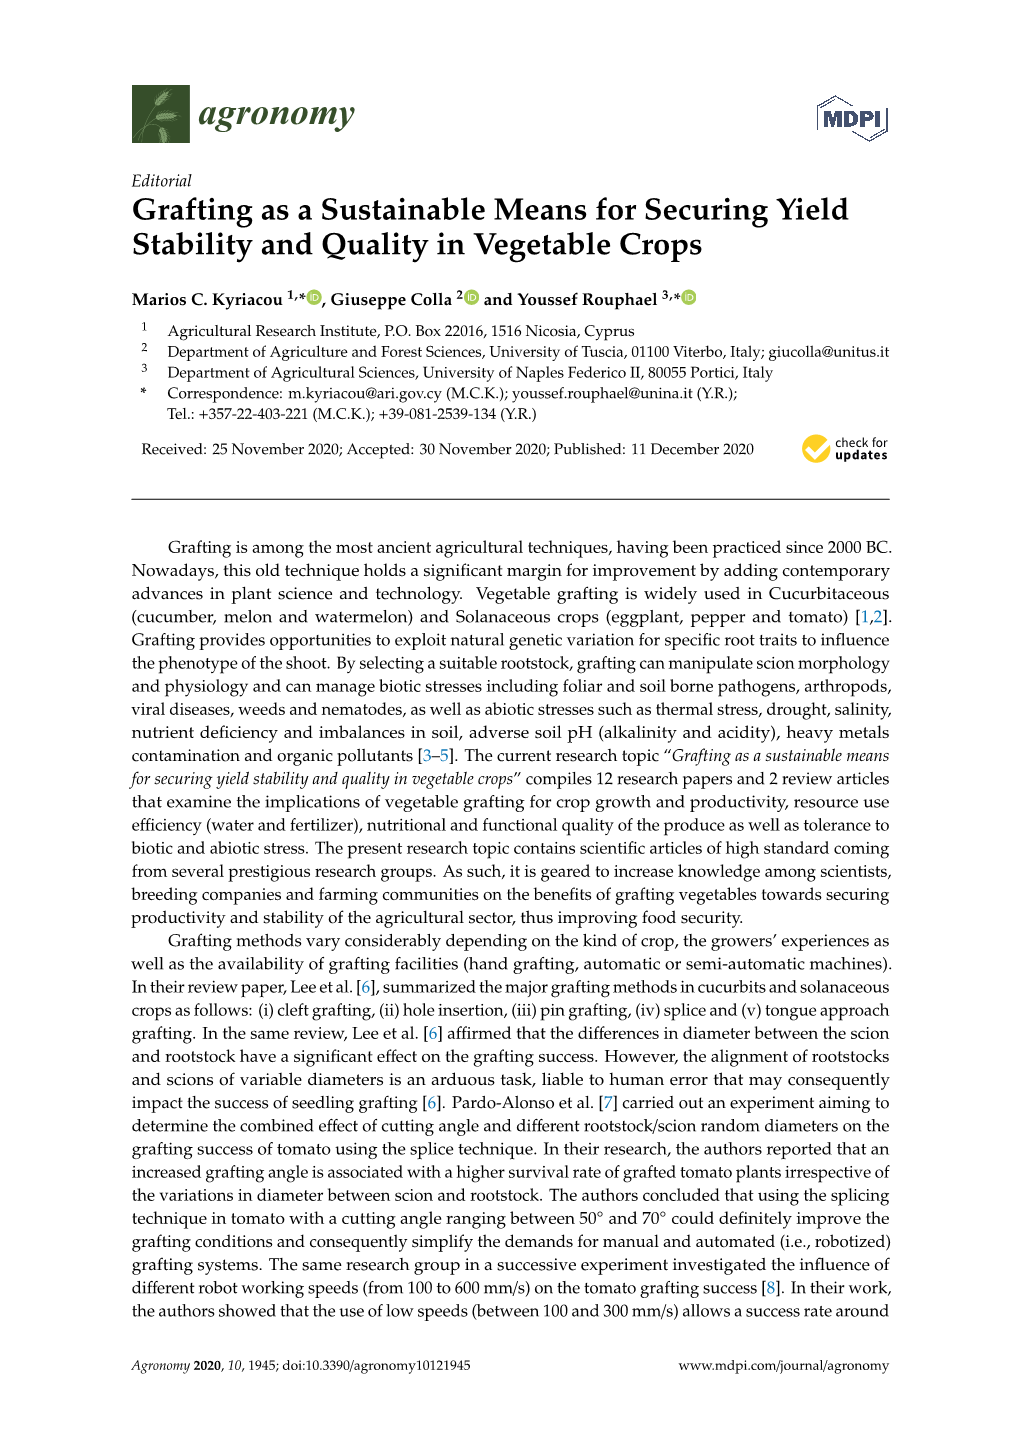 Grafting As a Sustainable Means for Securing Yield Stability and Quality in Vegetable Crops